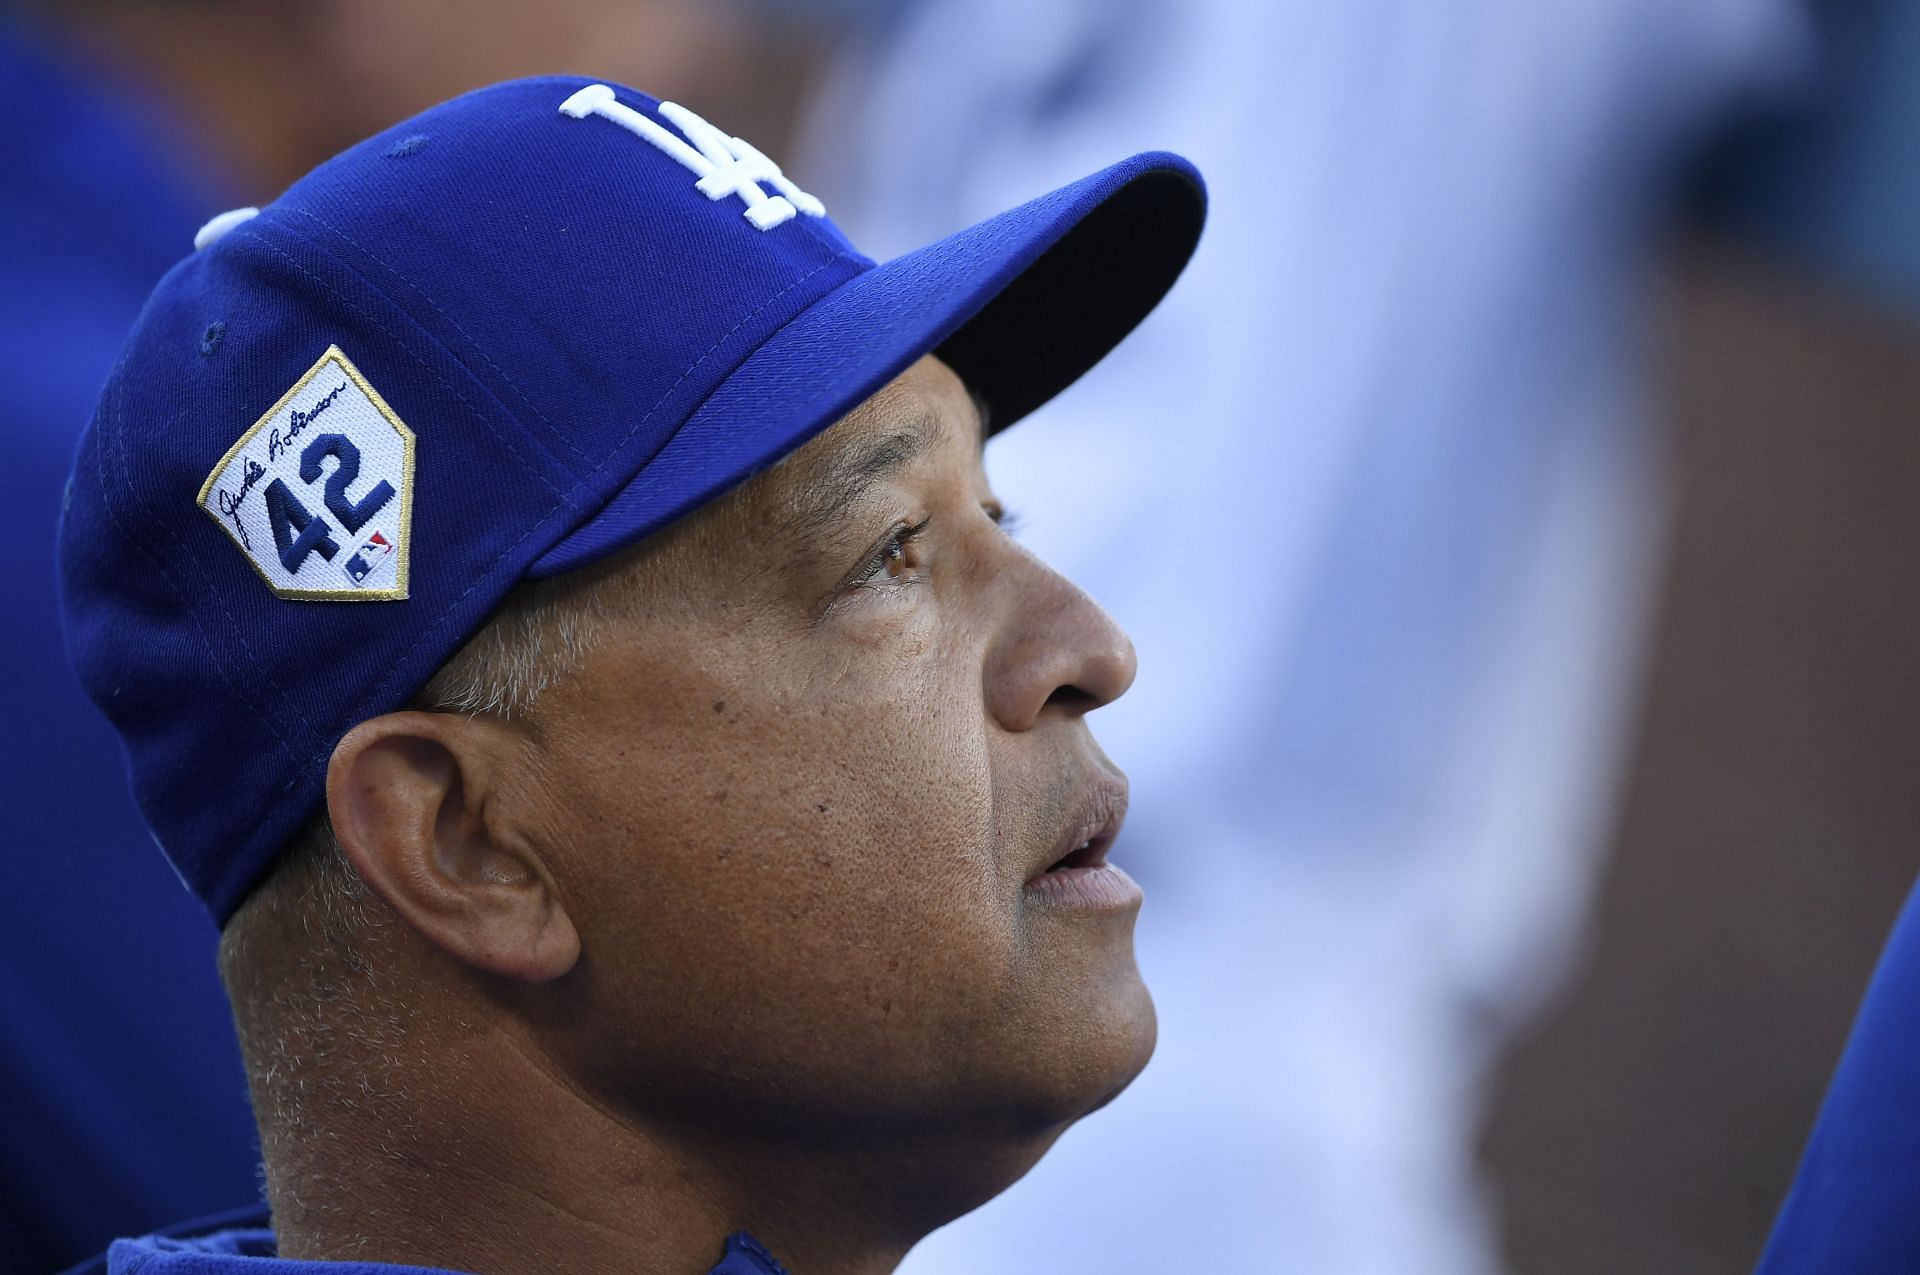 Dodgers Manager Dave Roberts Keeps Us Looking Up - L.A. Parent